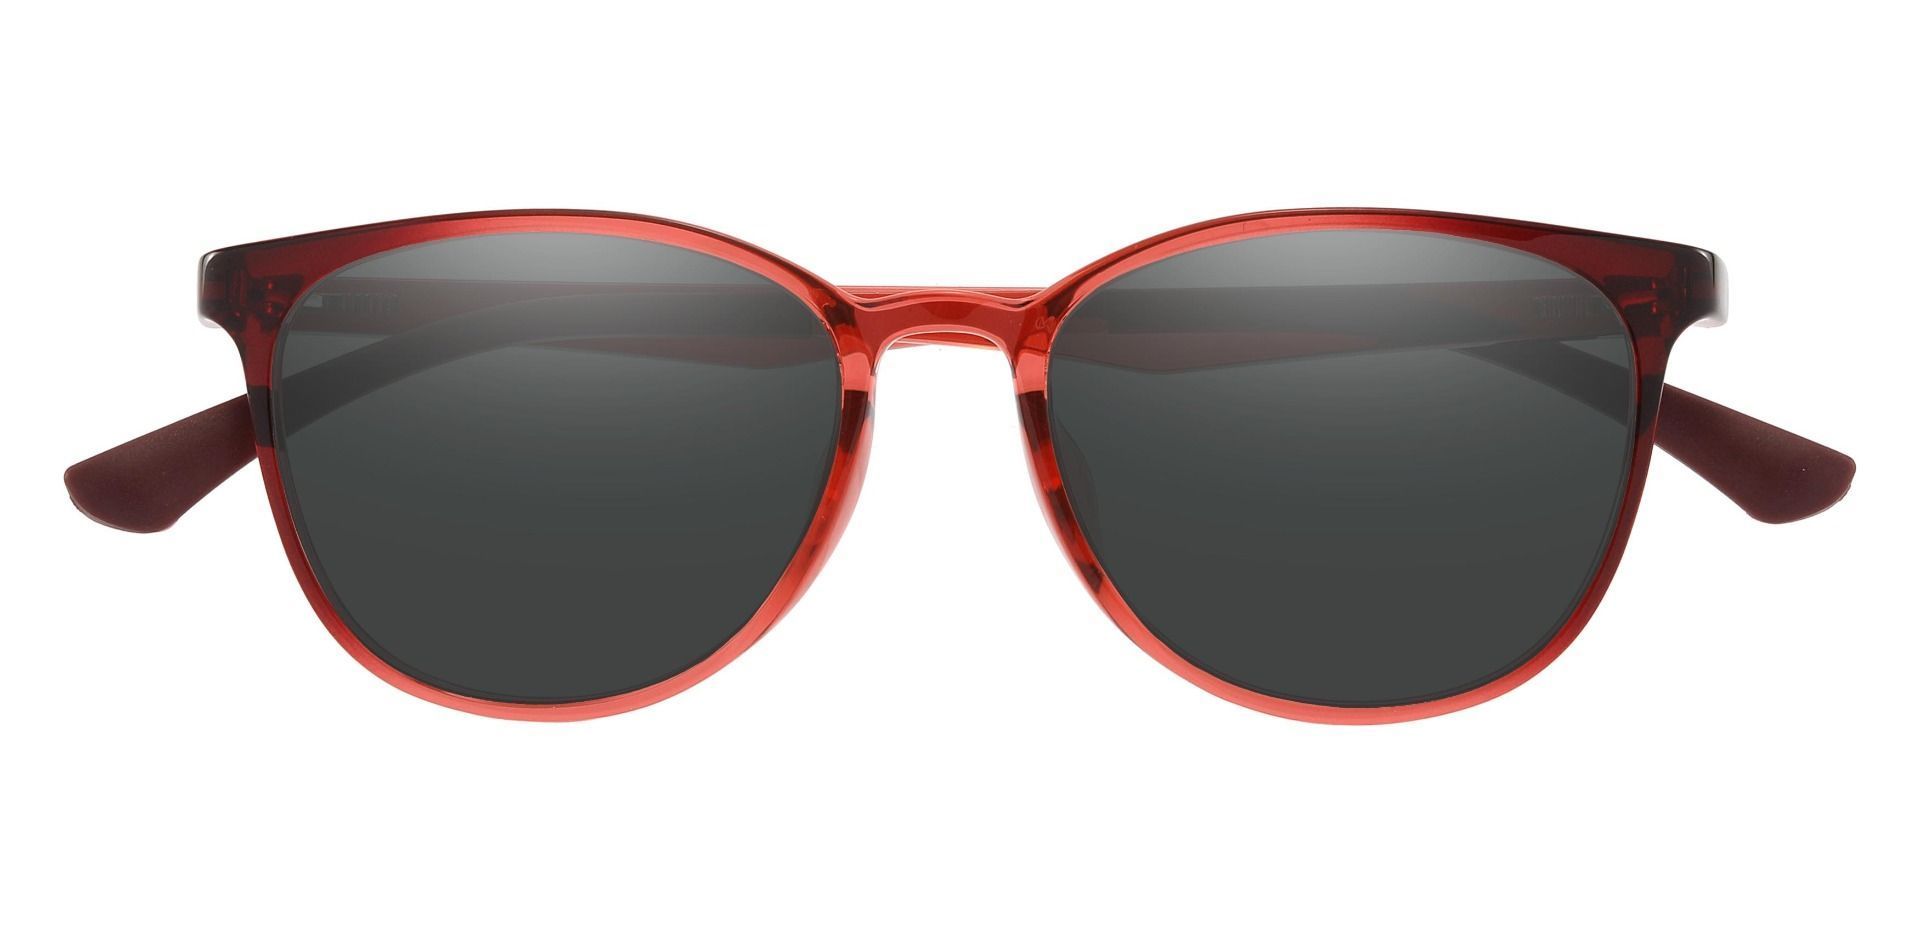 Pembroke Oval Non-Rx Sunglasses - Pink Frame With Gray Lenses